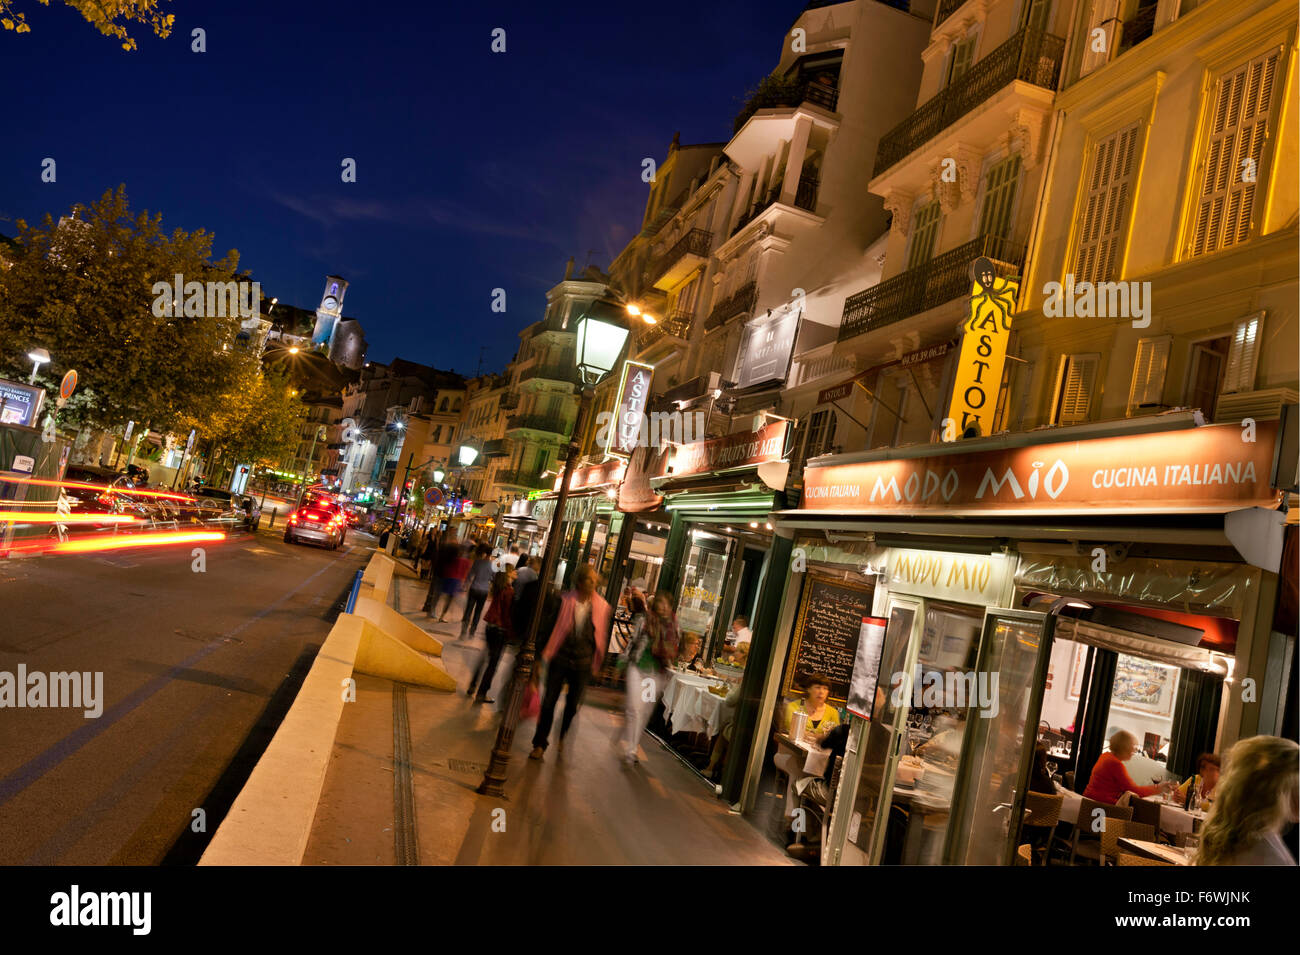 Seafood restaurant on Rue Felix Faure, Cannes, Provence, France Stock Photo